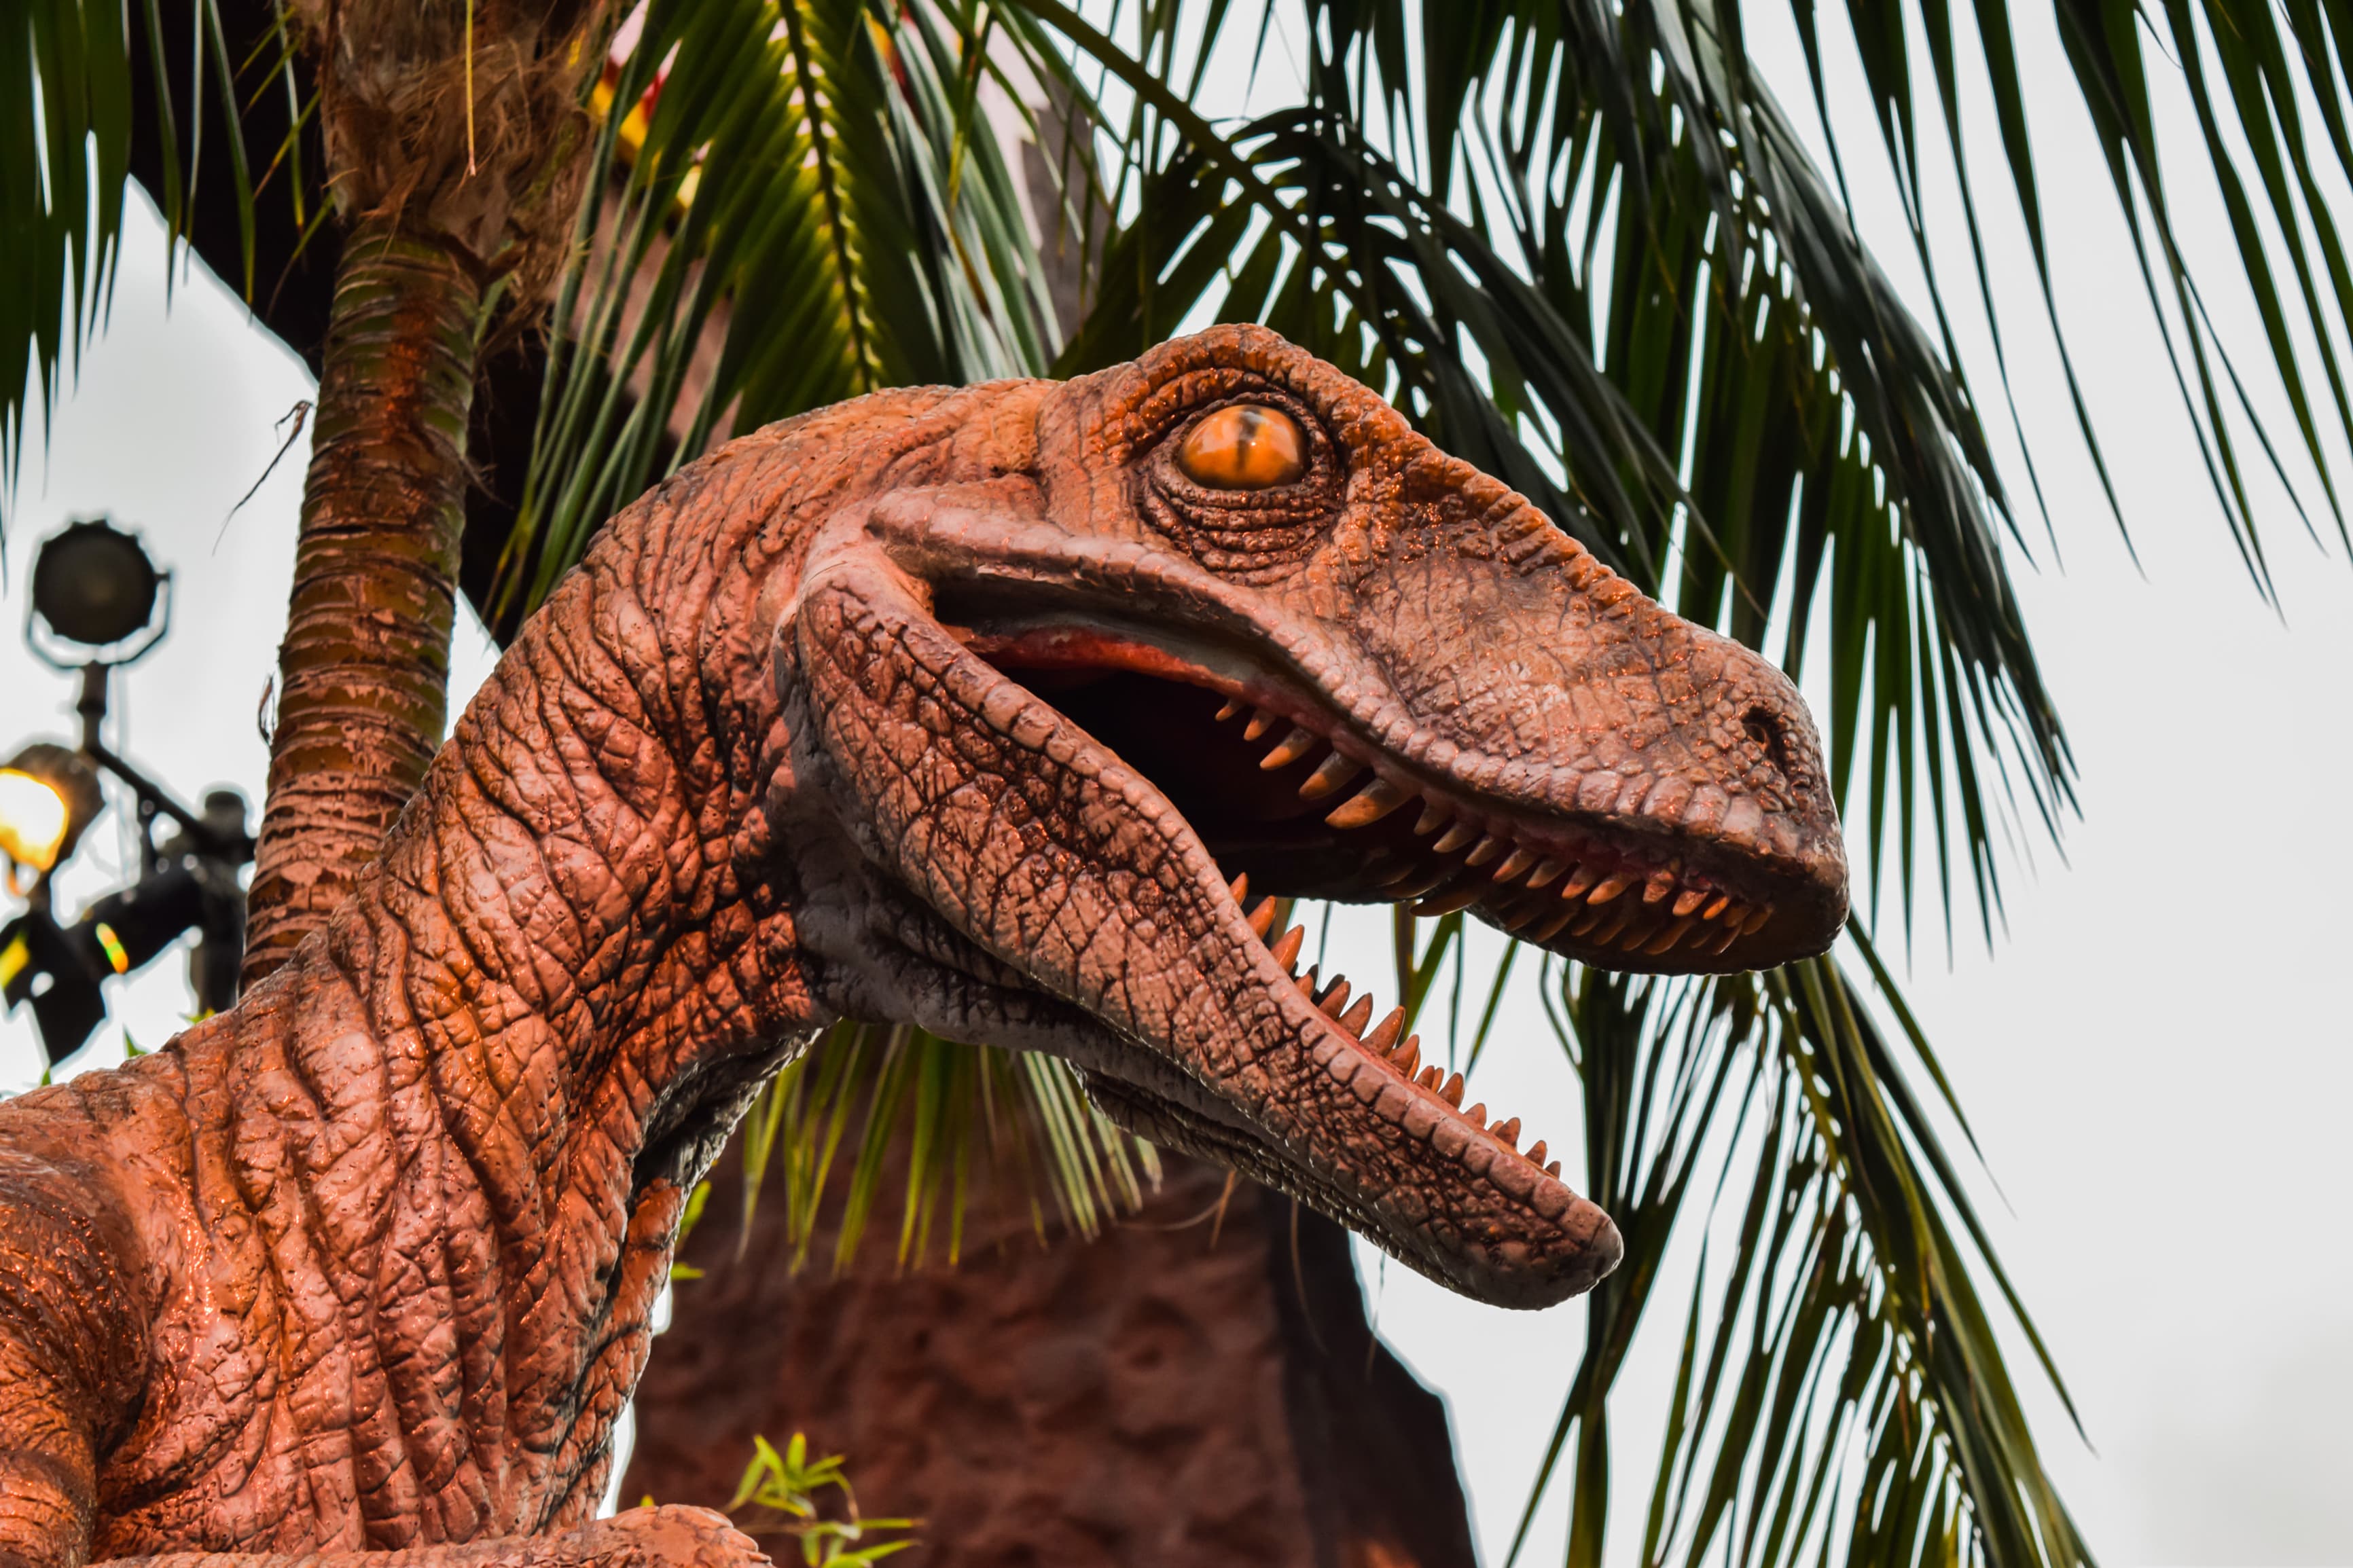 A view of a ferocious raptor's head from the Jurassic Park ride at Univesal Studios Hollywood